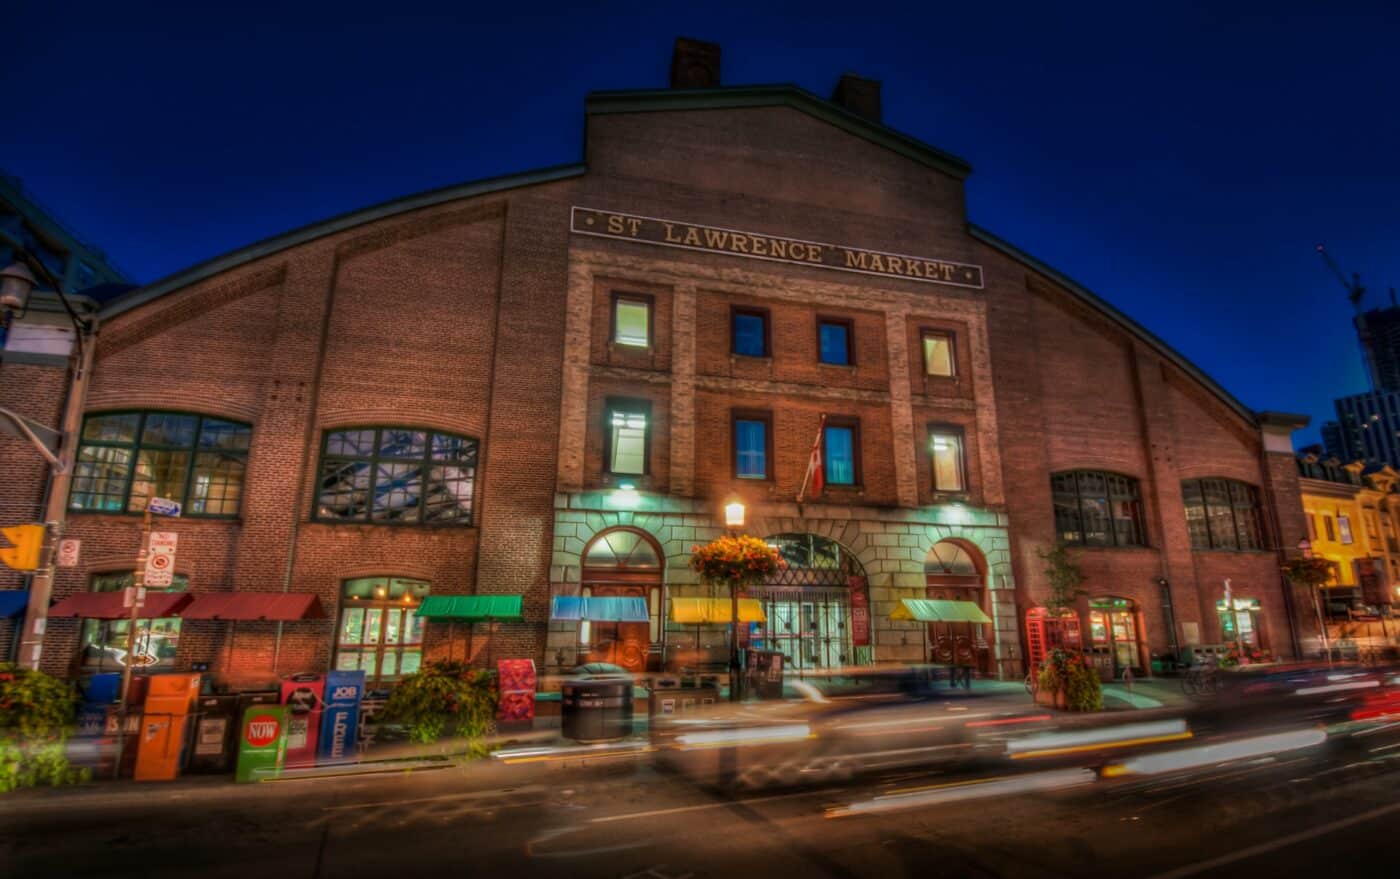 st lawrence market at night